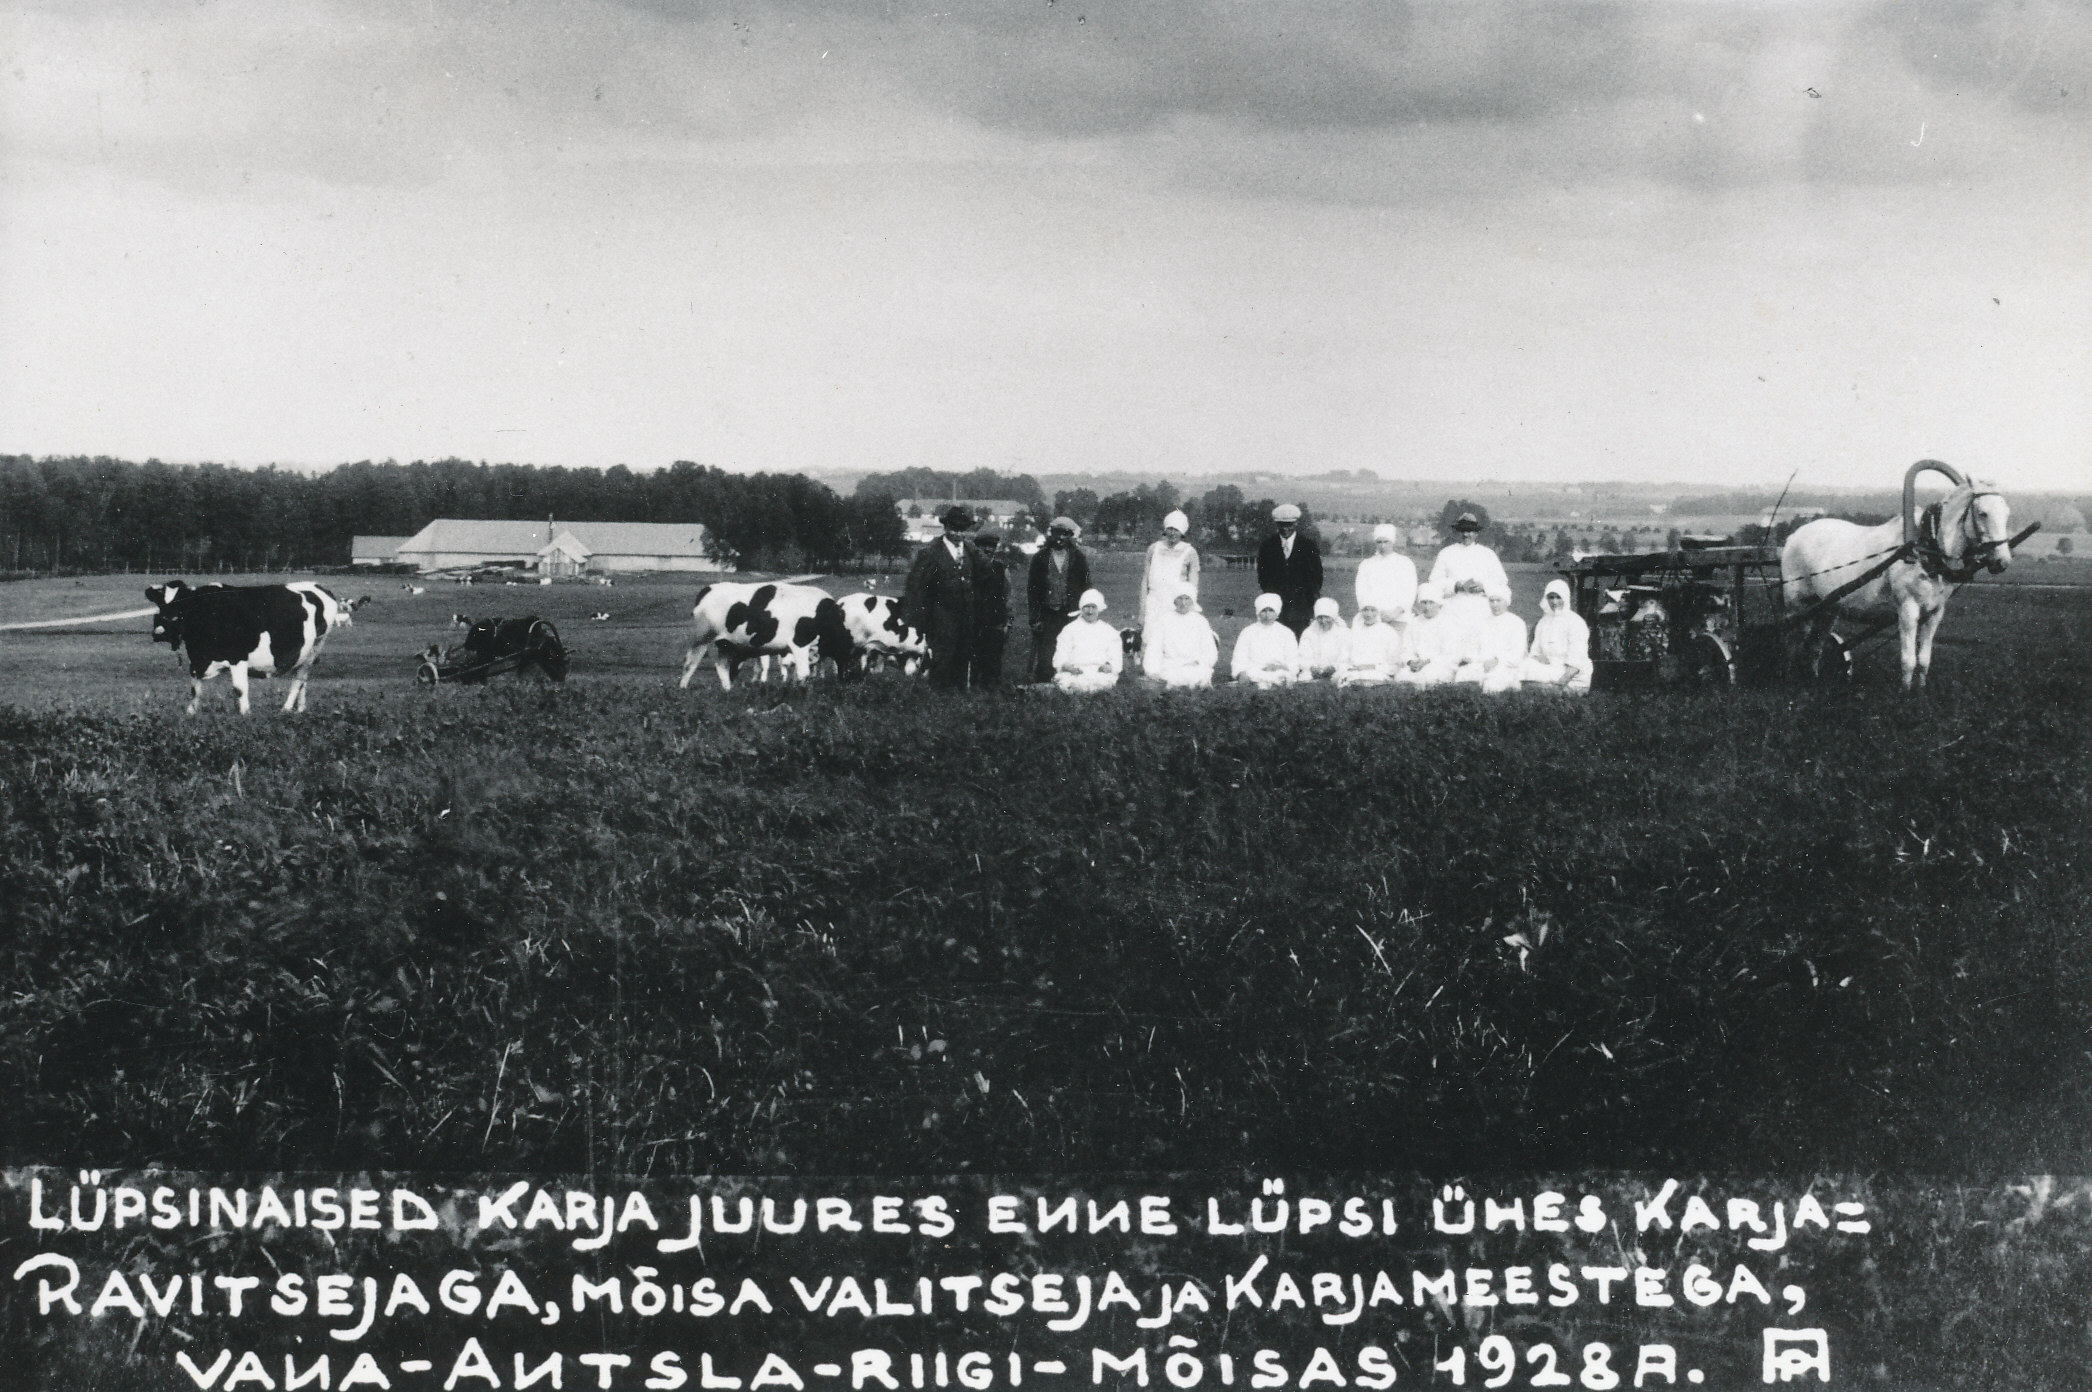 Photo. Lipsinaiset at the cattle in the Vana-Antsla National Manor in 1928.